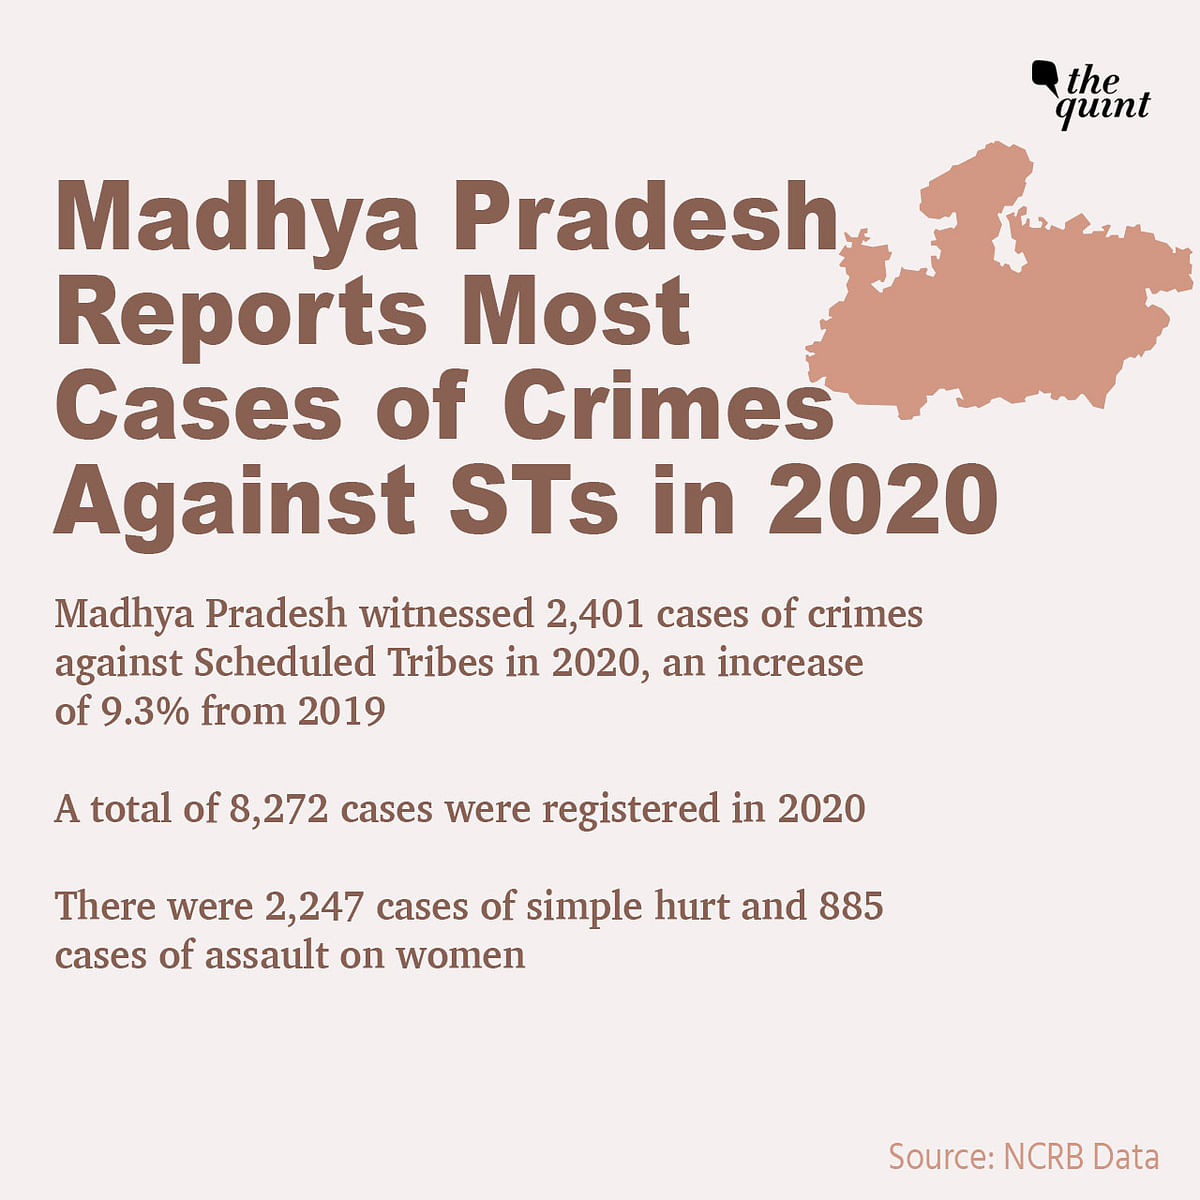 Crimes against women cases declined by 8.3%, from 4,05,326 in 2019 to 3,71,503 cases in 2020, revealed NCRB report.